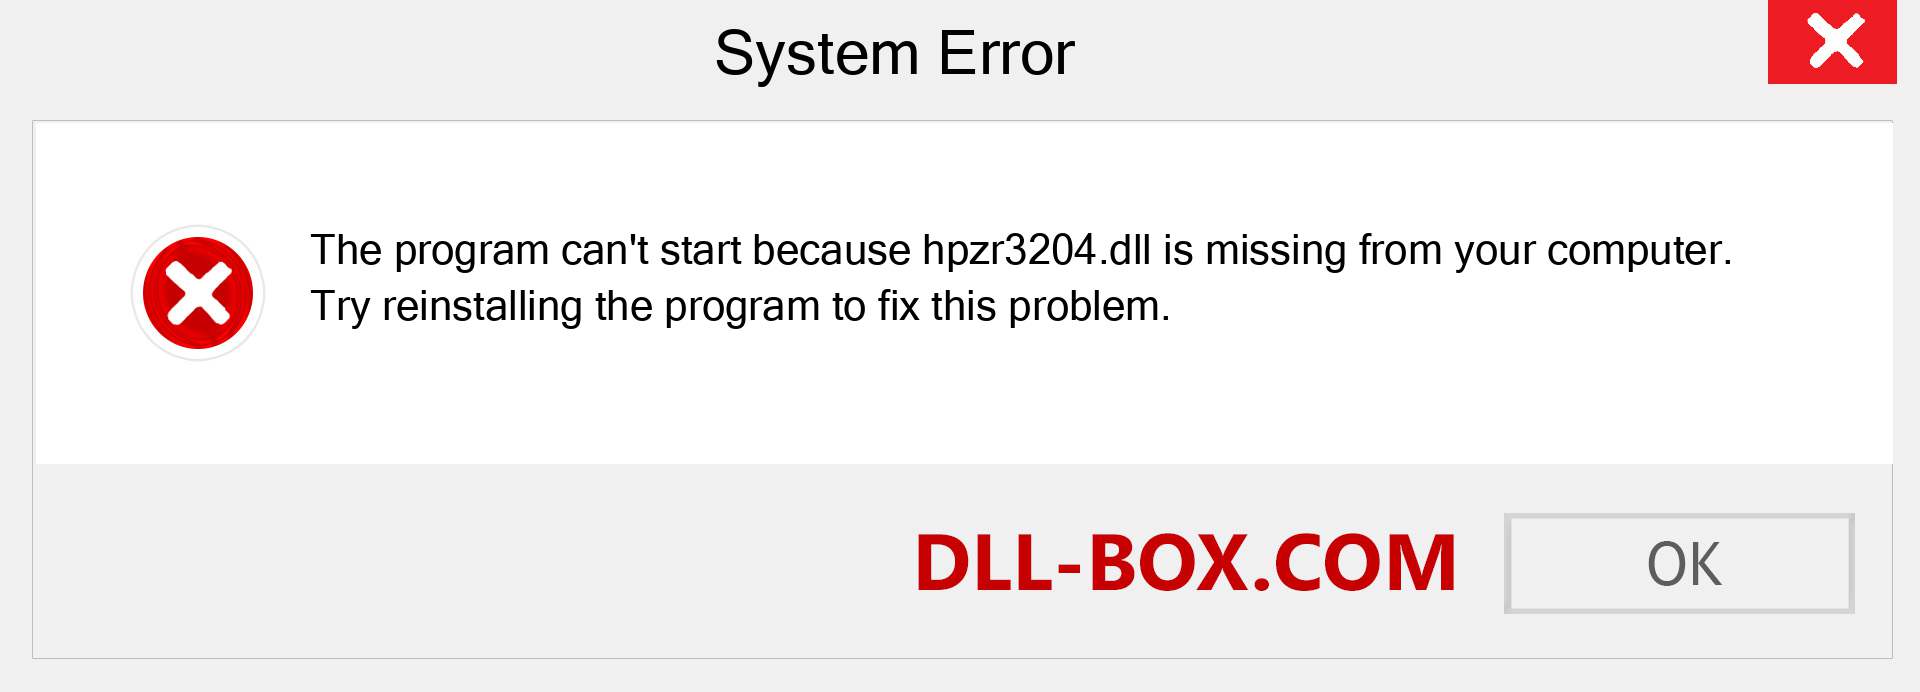  hpzr3204.dll file is missing?. Download for Windows 7, 8, 10 - Fix  hpzr3204 dll Missing Error on Windows, photos, images